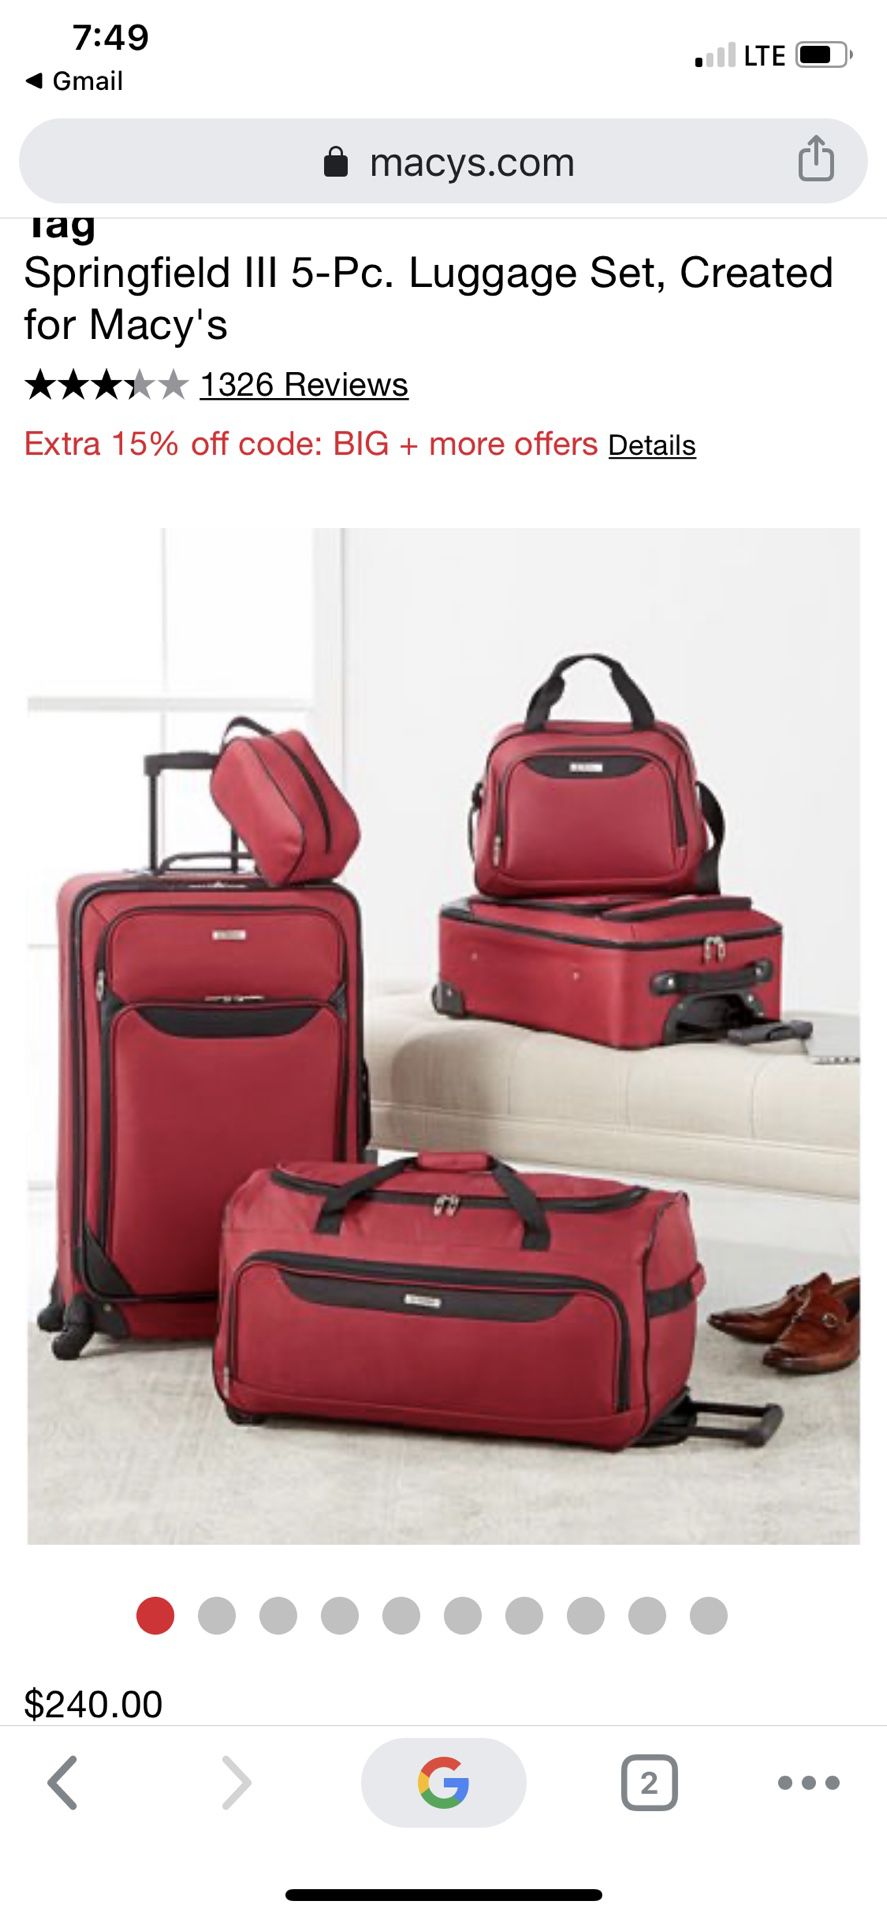 Luggage set created for Macy’s